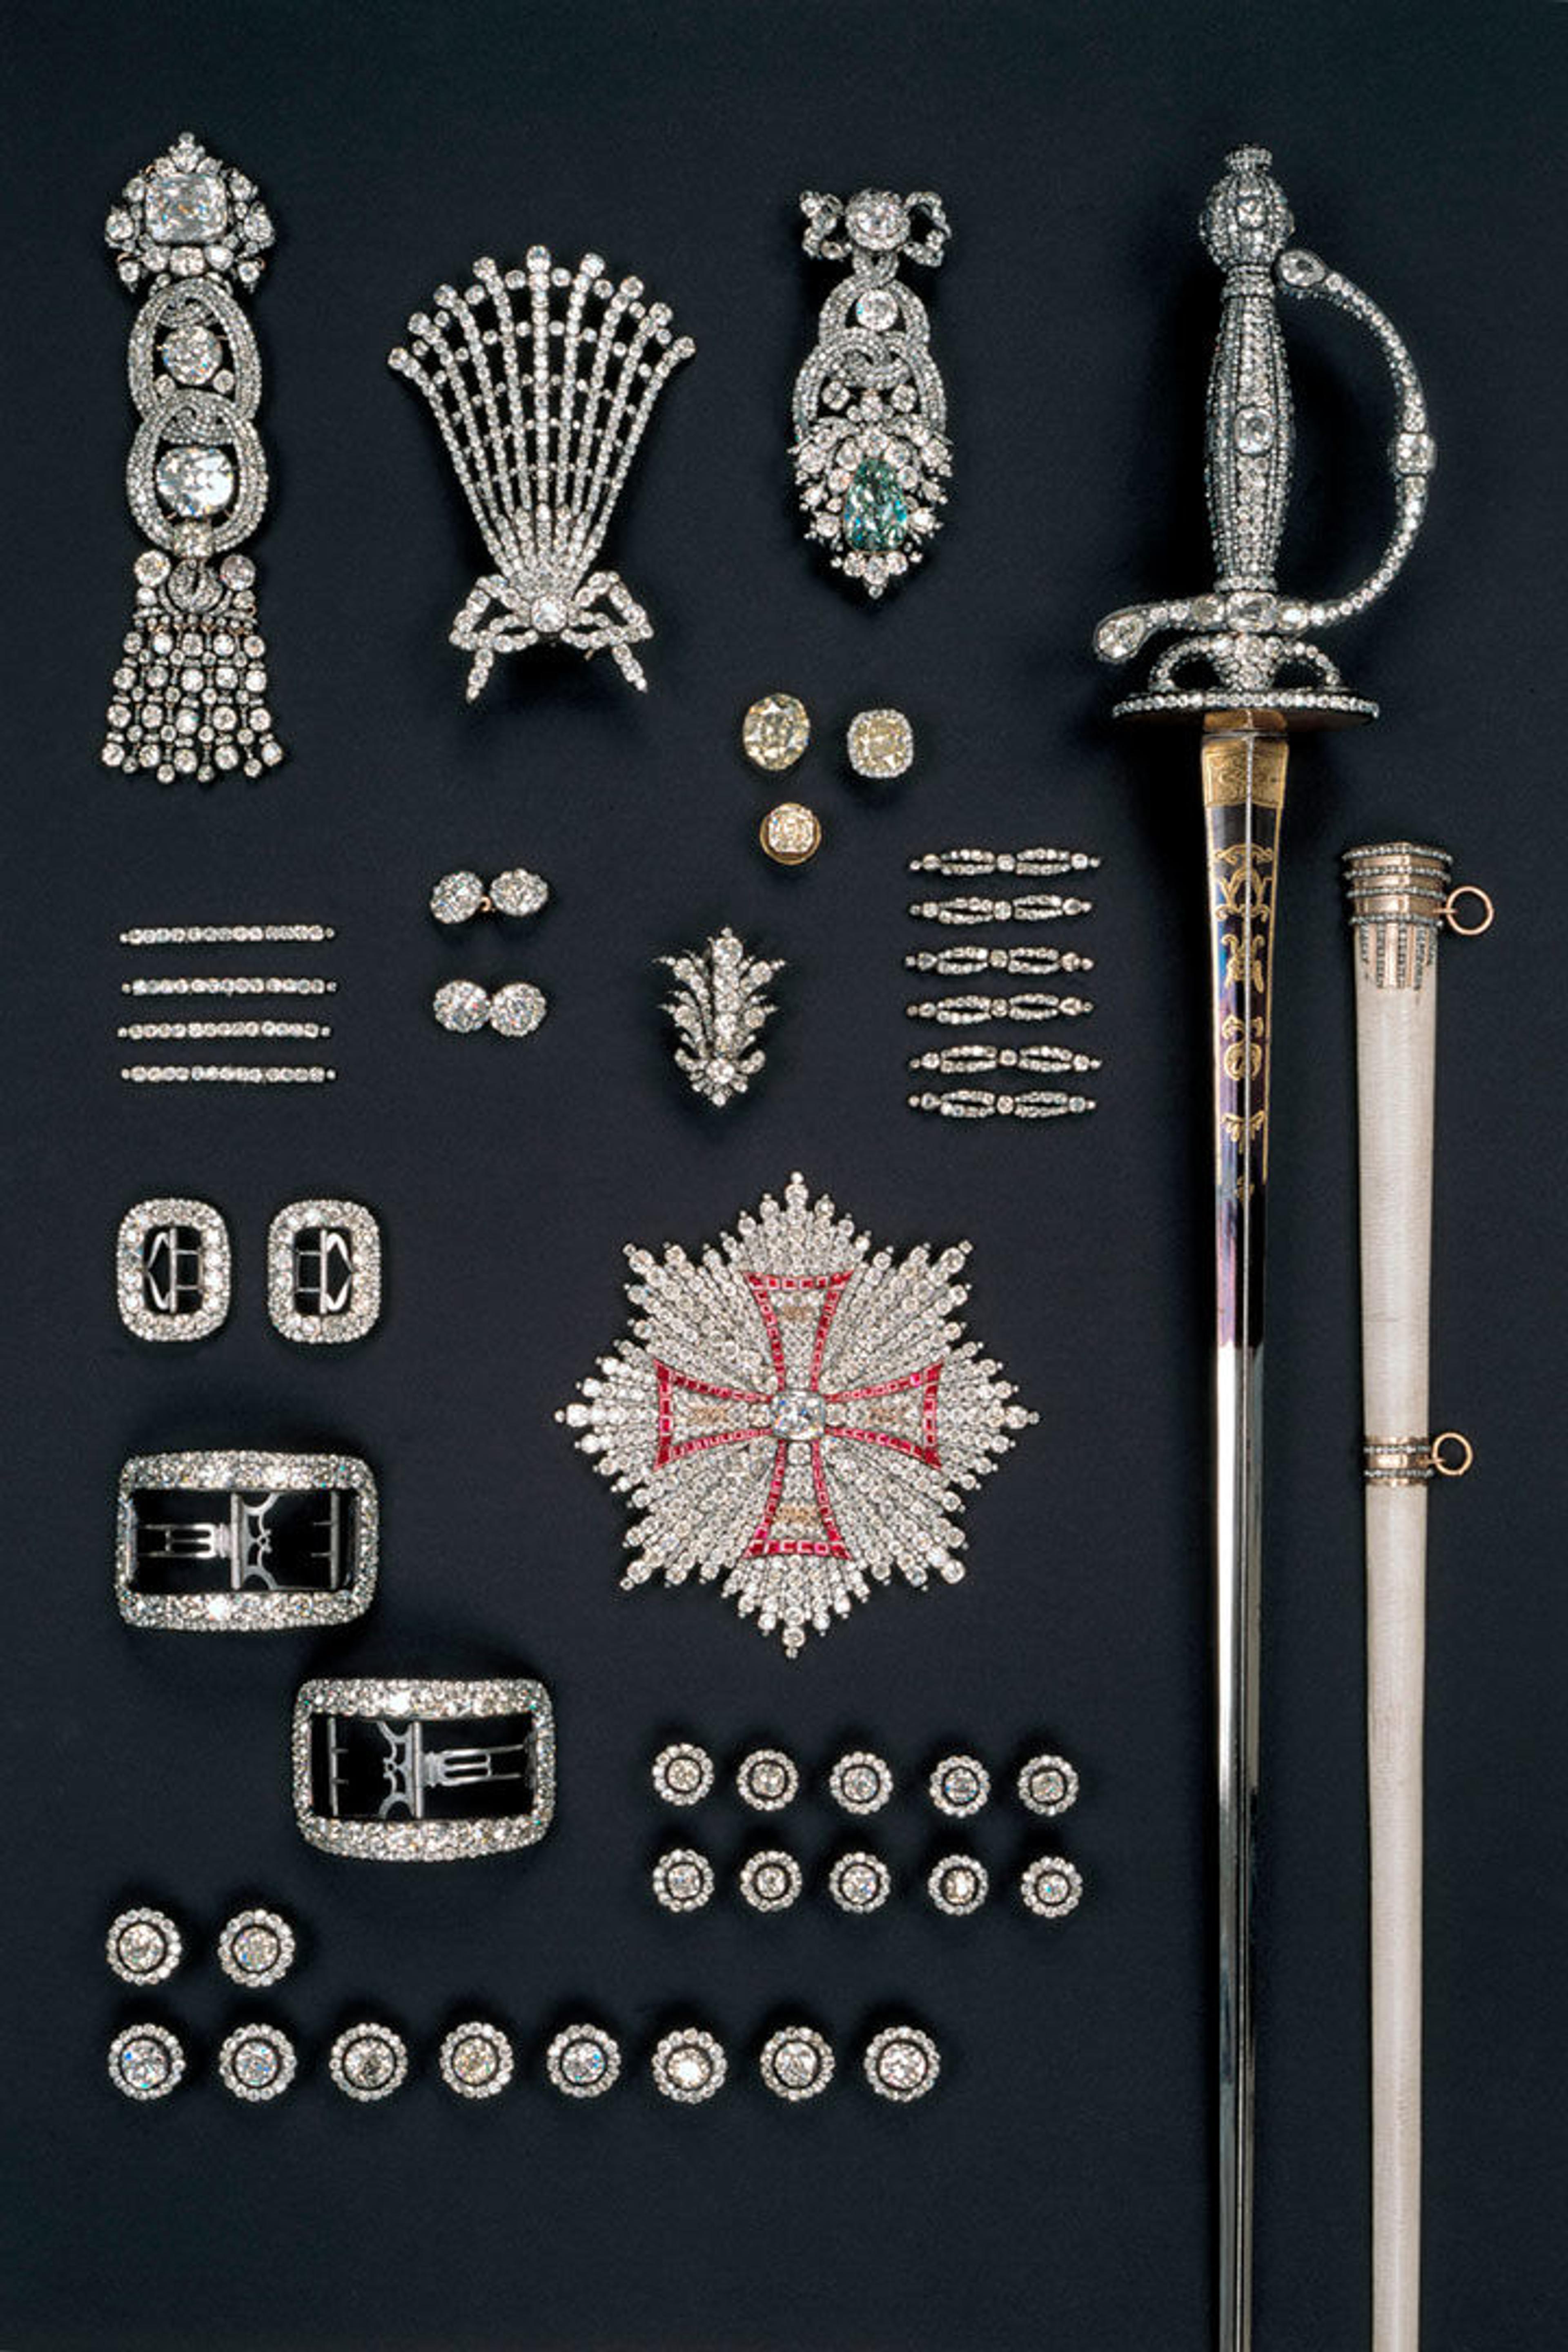 A photograph of various riches laid out on atable, including a sword, gemmed pendants, and the Dresden Green diamond